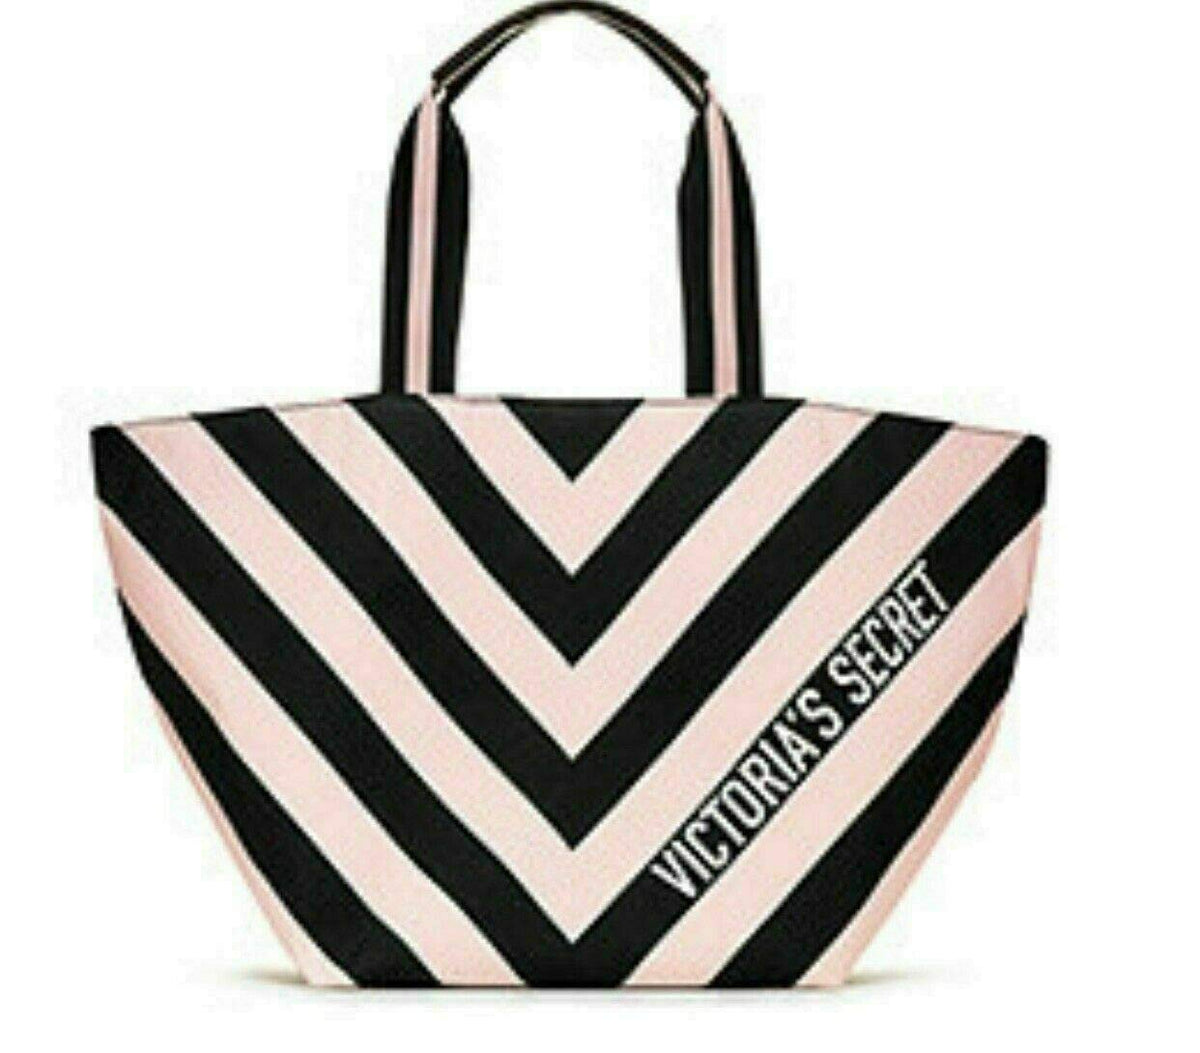 VICTORIAS SECRET Tote Bag Large LIMITED EDITION Pink White Striped